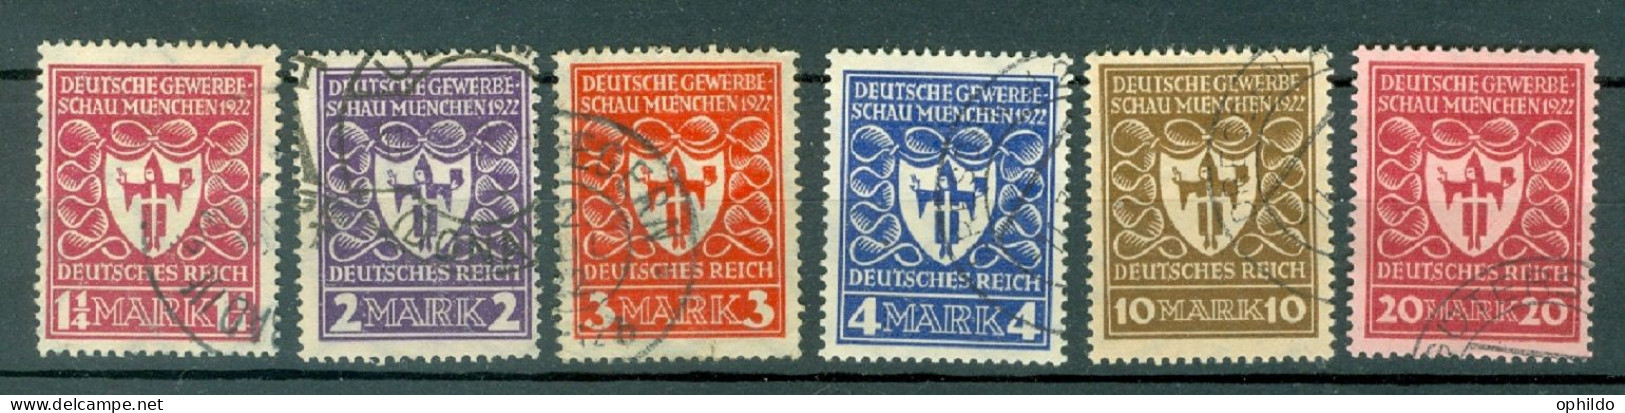 Allemagne  Michel  199/204  Ob  TB   - Used Stamps